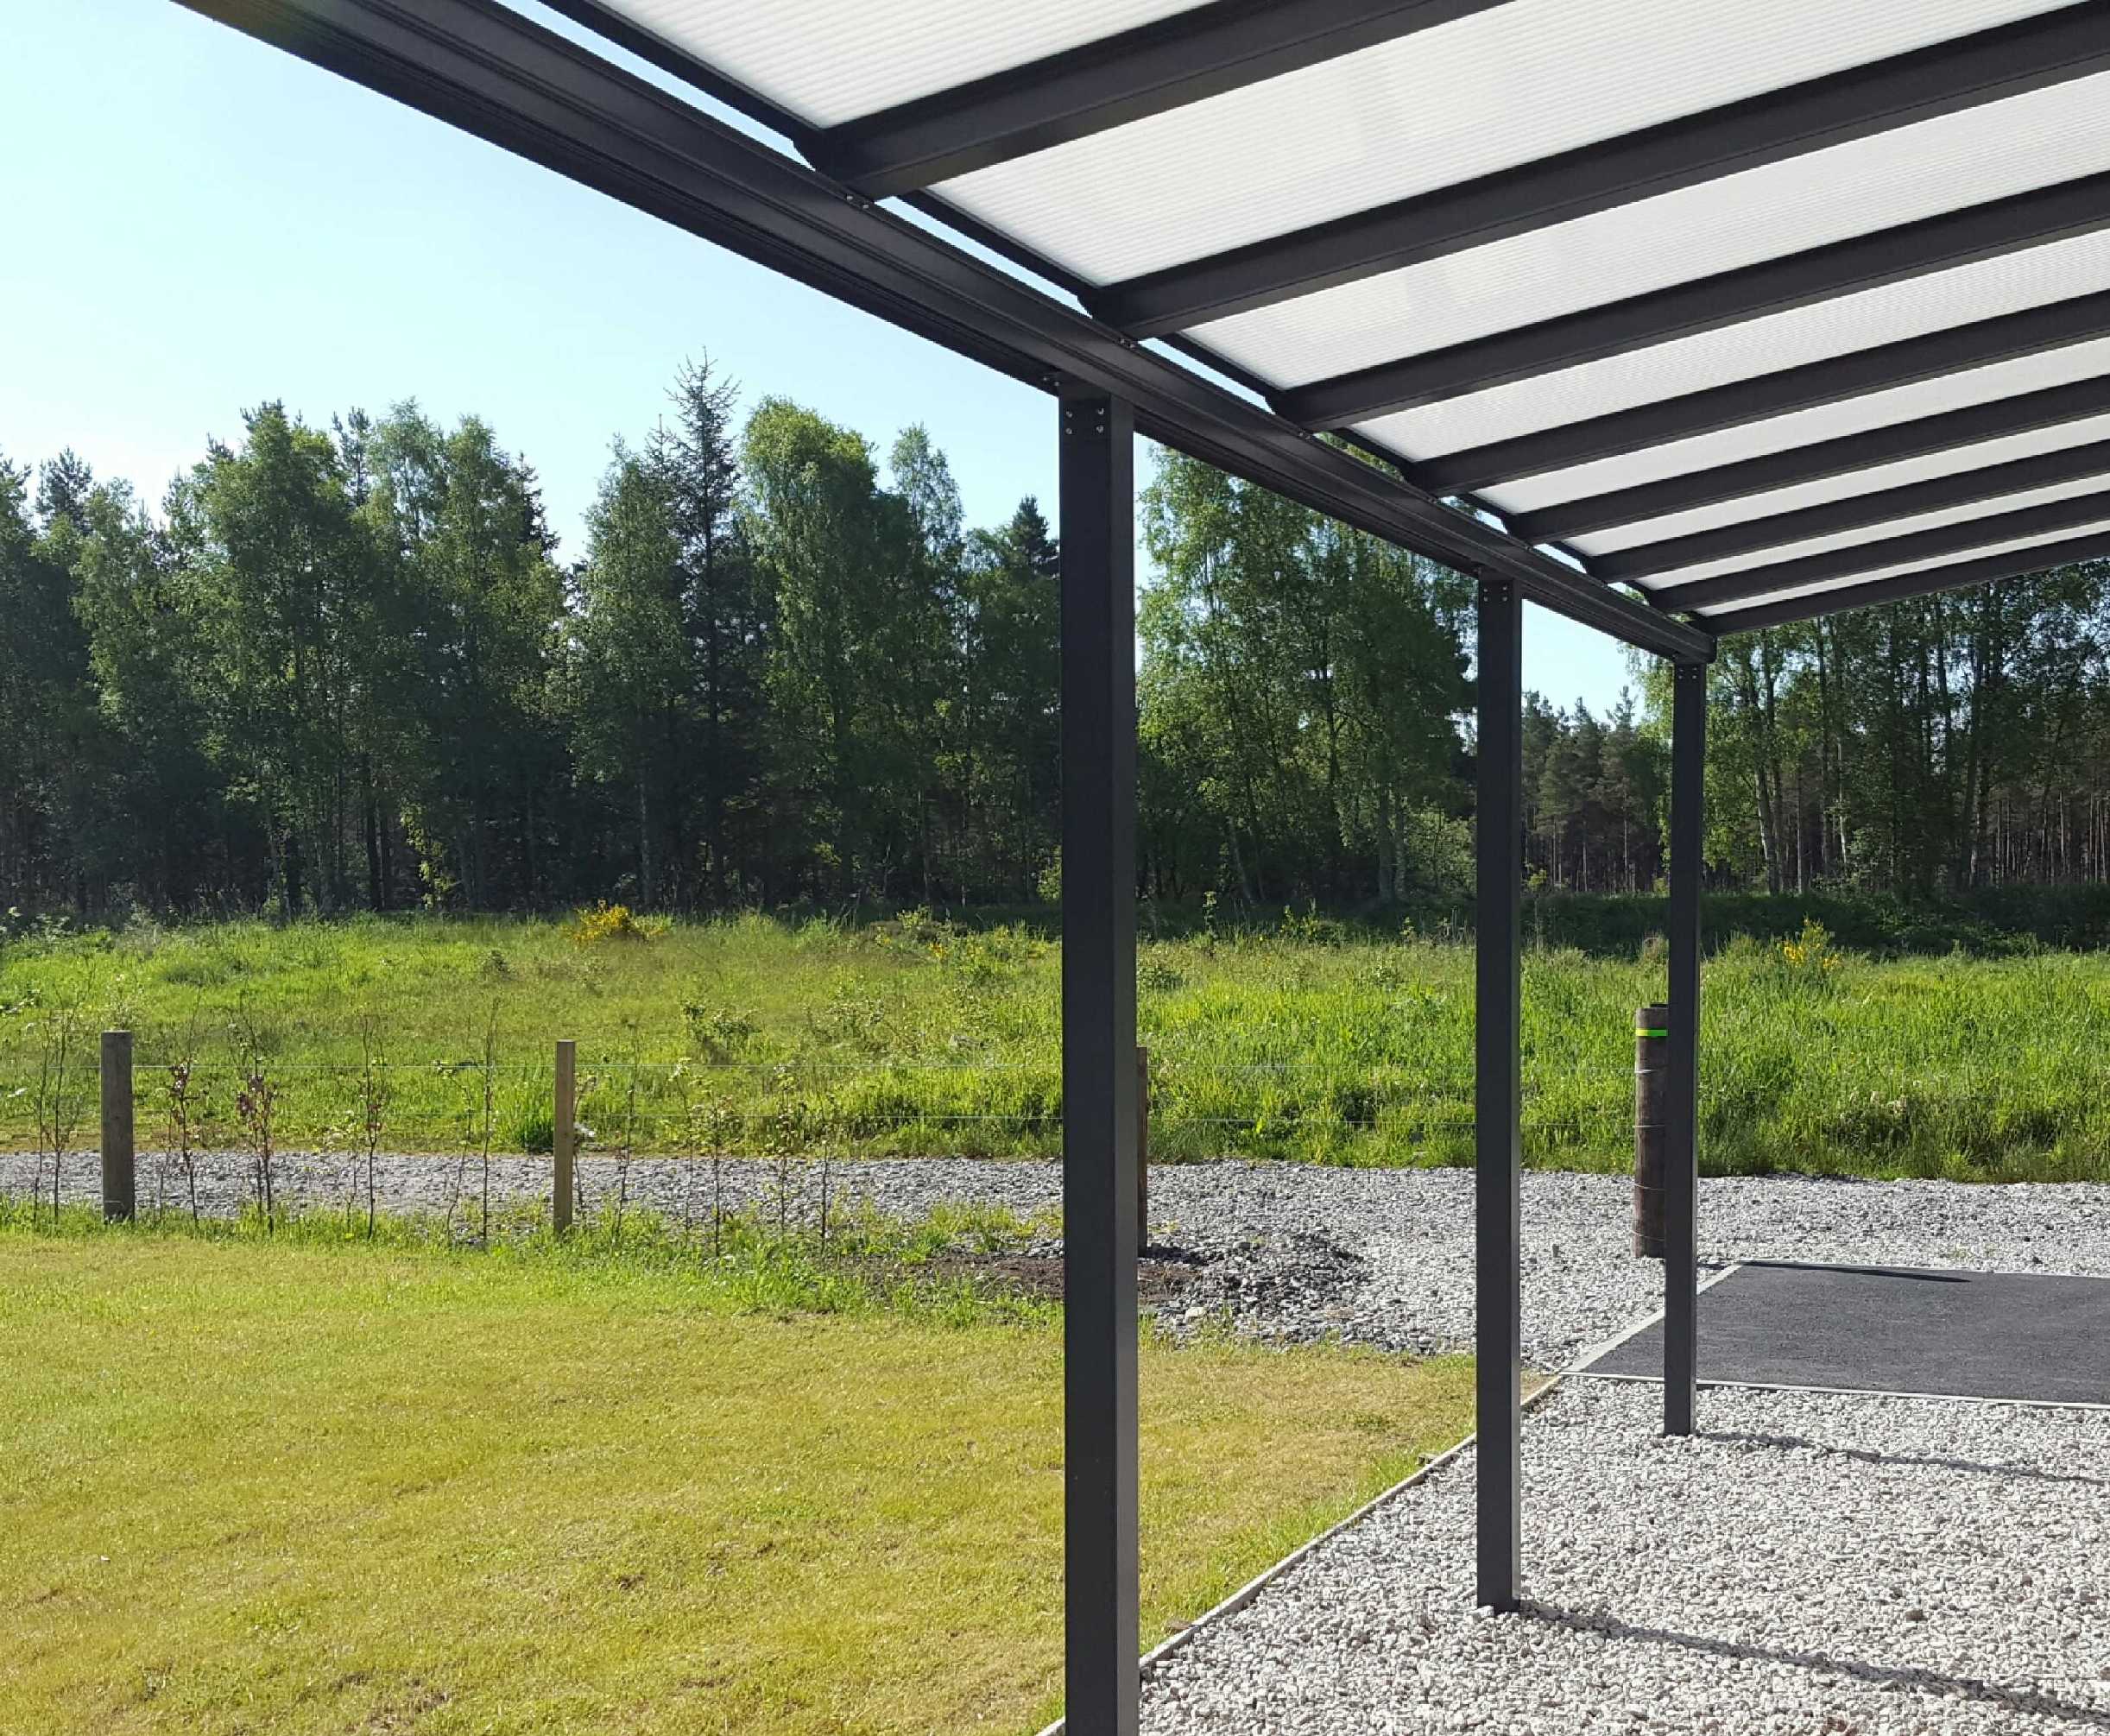 SPECIAL OFFER Omega Smart Lean-To Canopy, Anthracite Grey, 16mm Polycarbonate Glazing - 3.1m (W) x 3.0m (P), (2) Supporting Posts